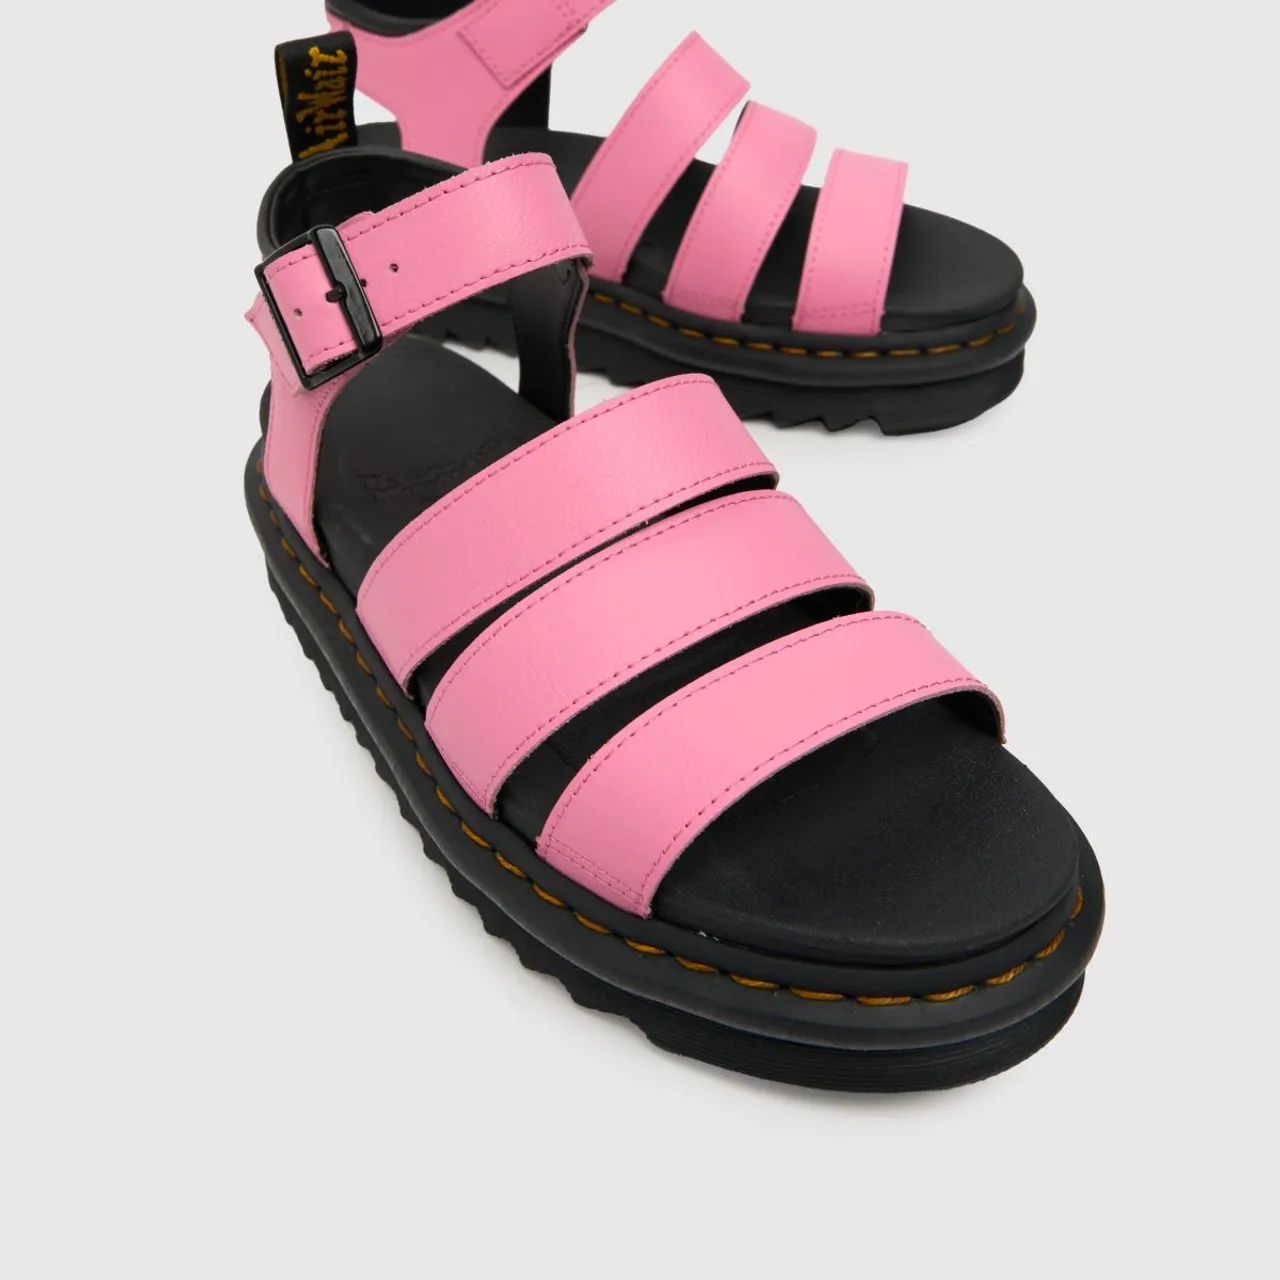 Dr Martens Blaire Sandals in Pink